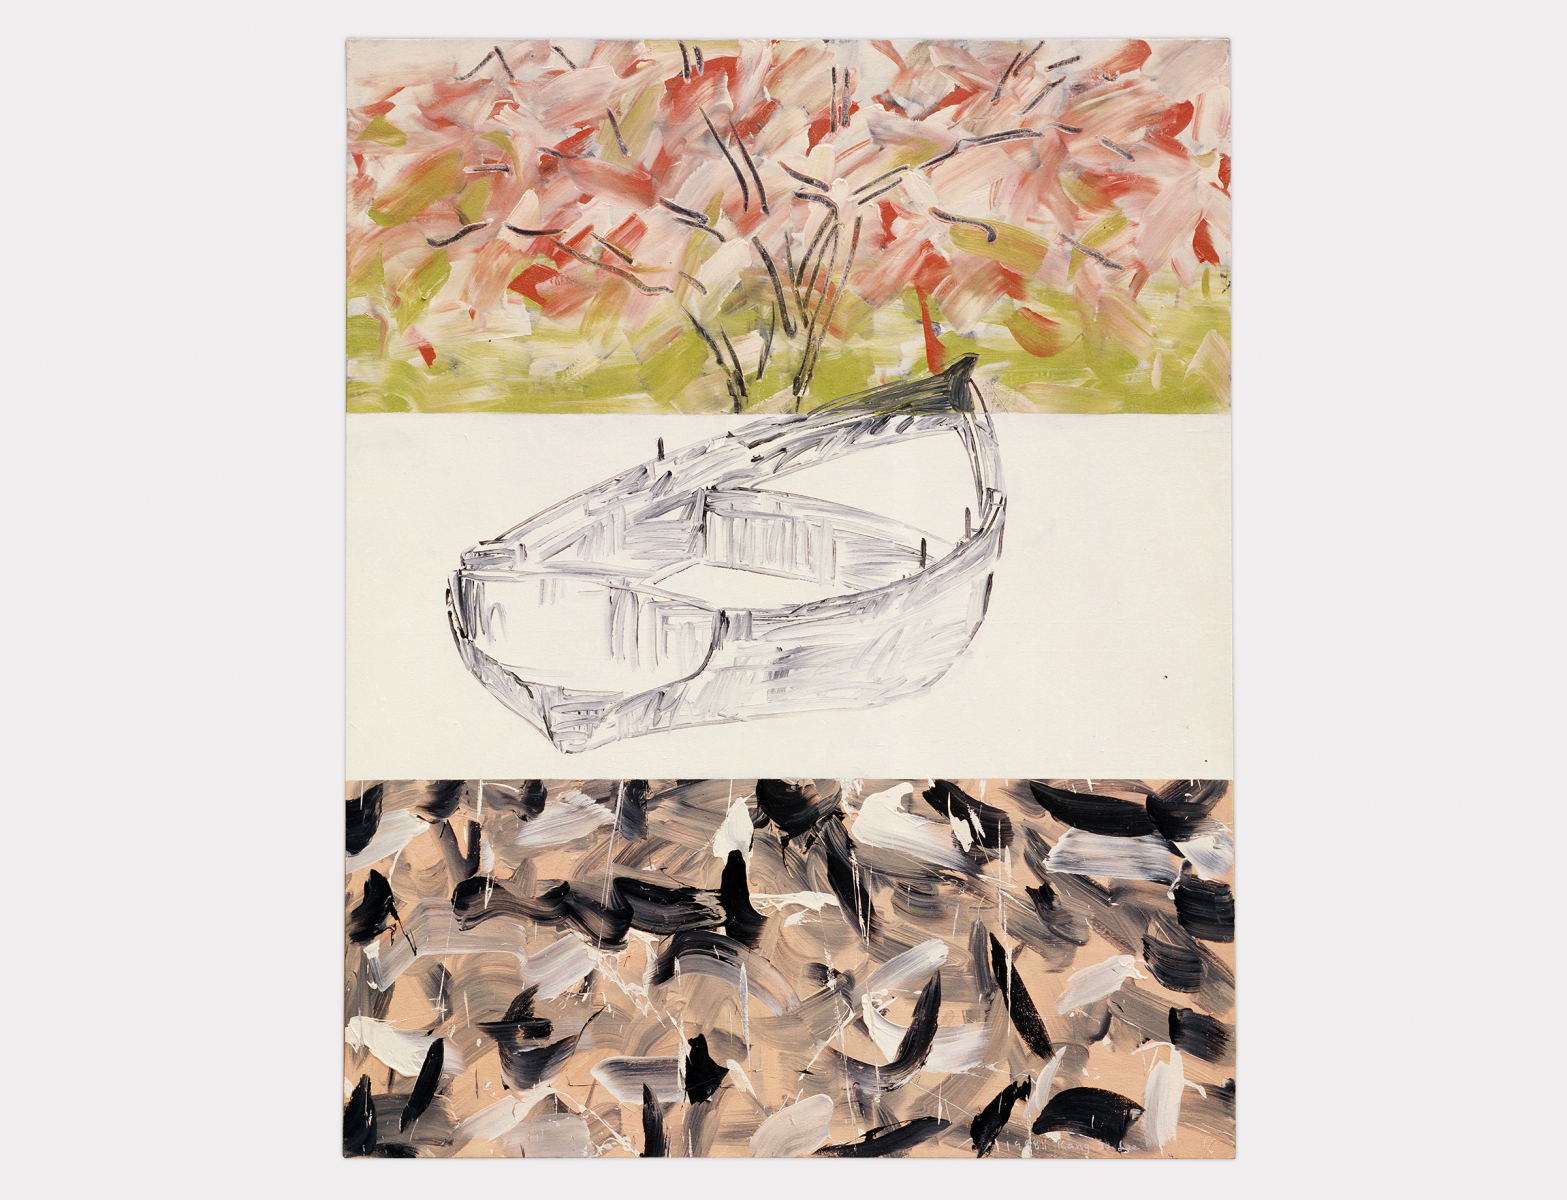 Untitled-88027, 1988, Oil on Canvas, 130.3x162cm